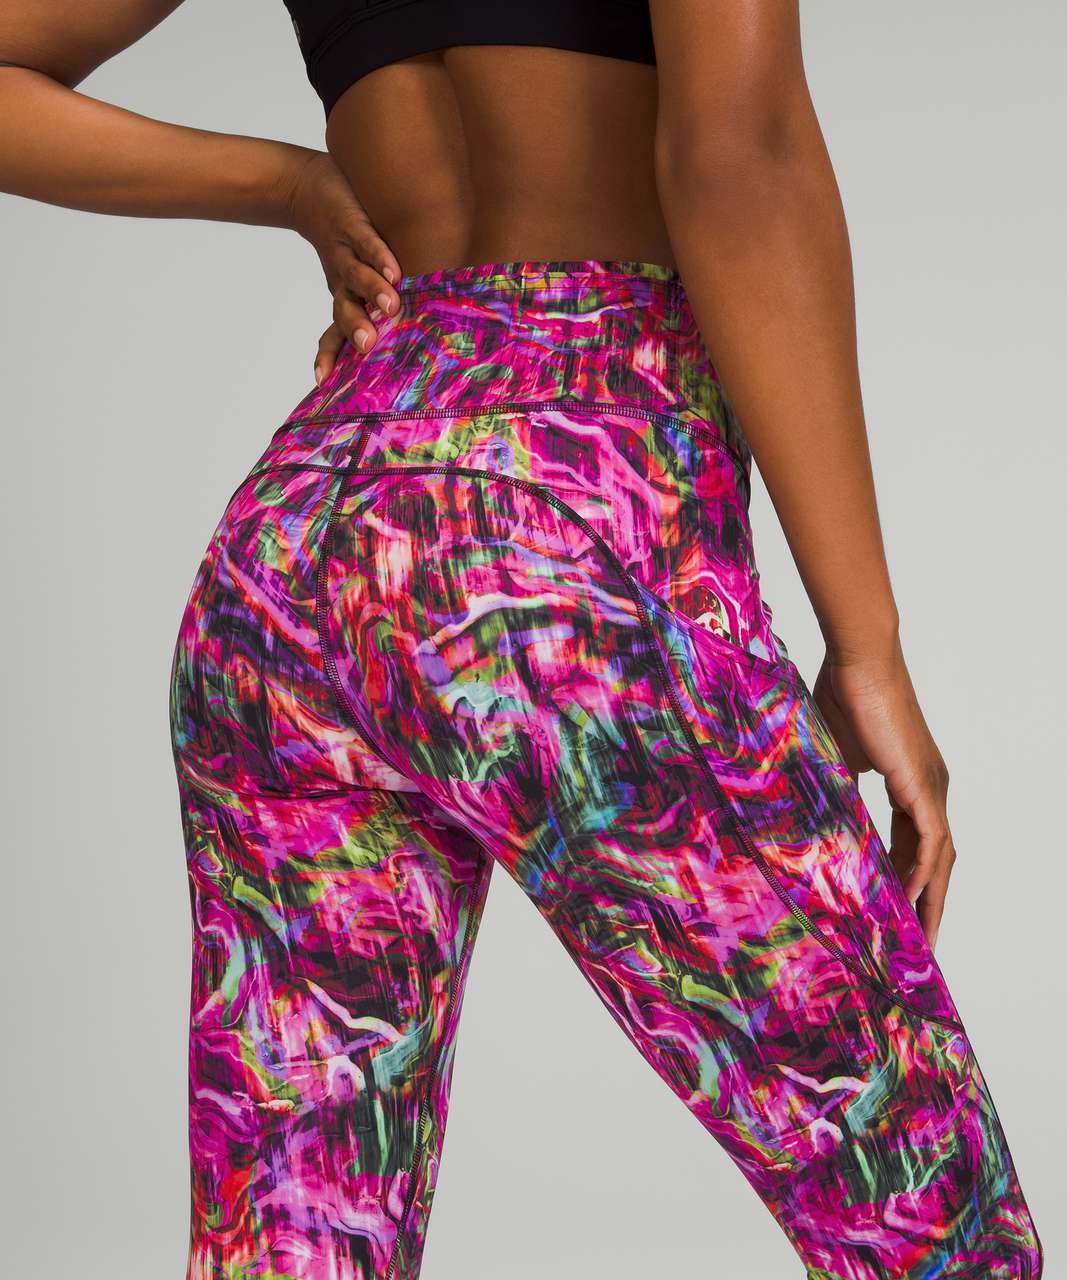 Lululemon Fast and Free High-Rise Crop 23" - Hyper Flow Pink Multi